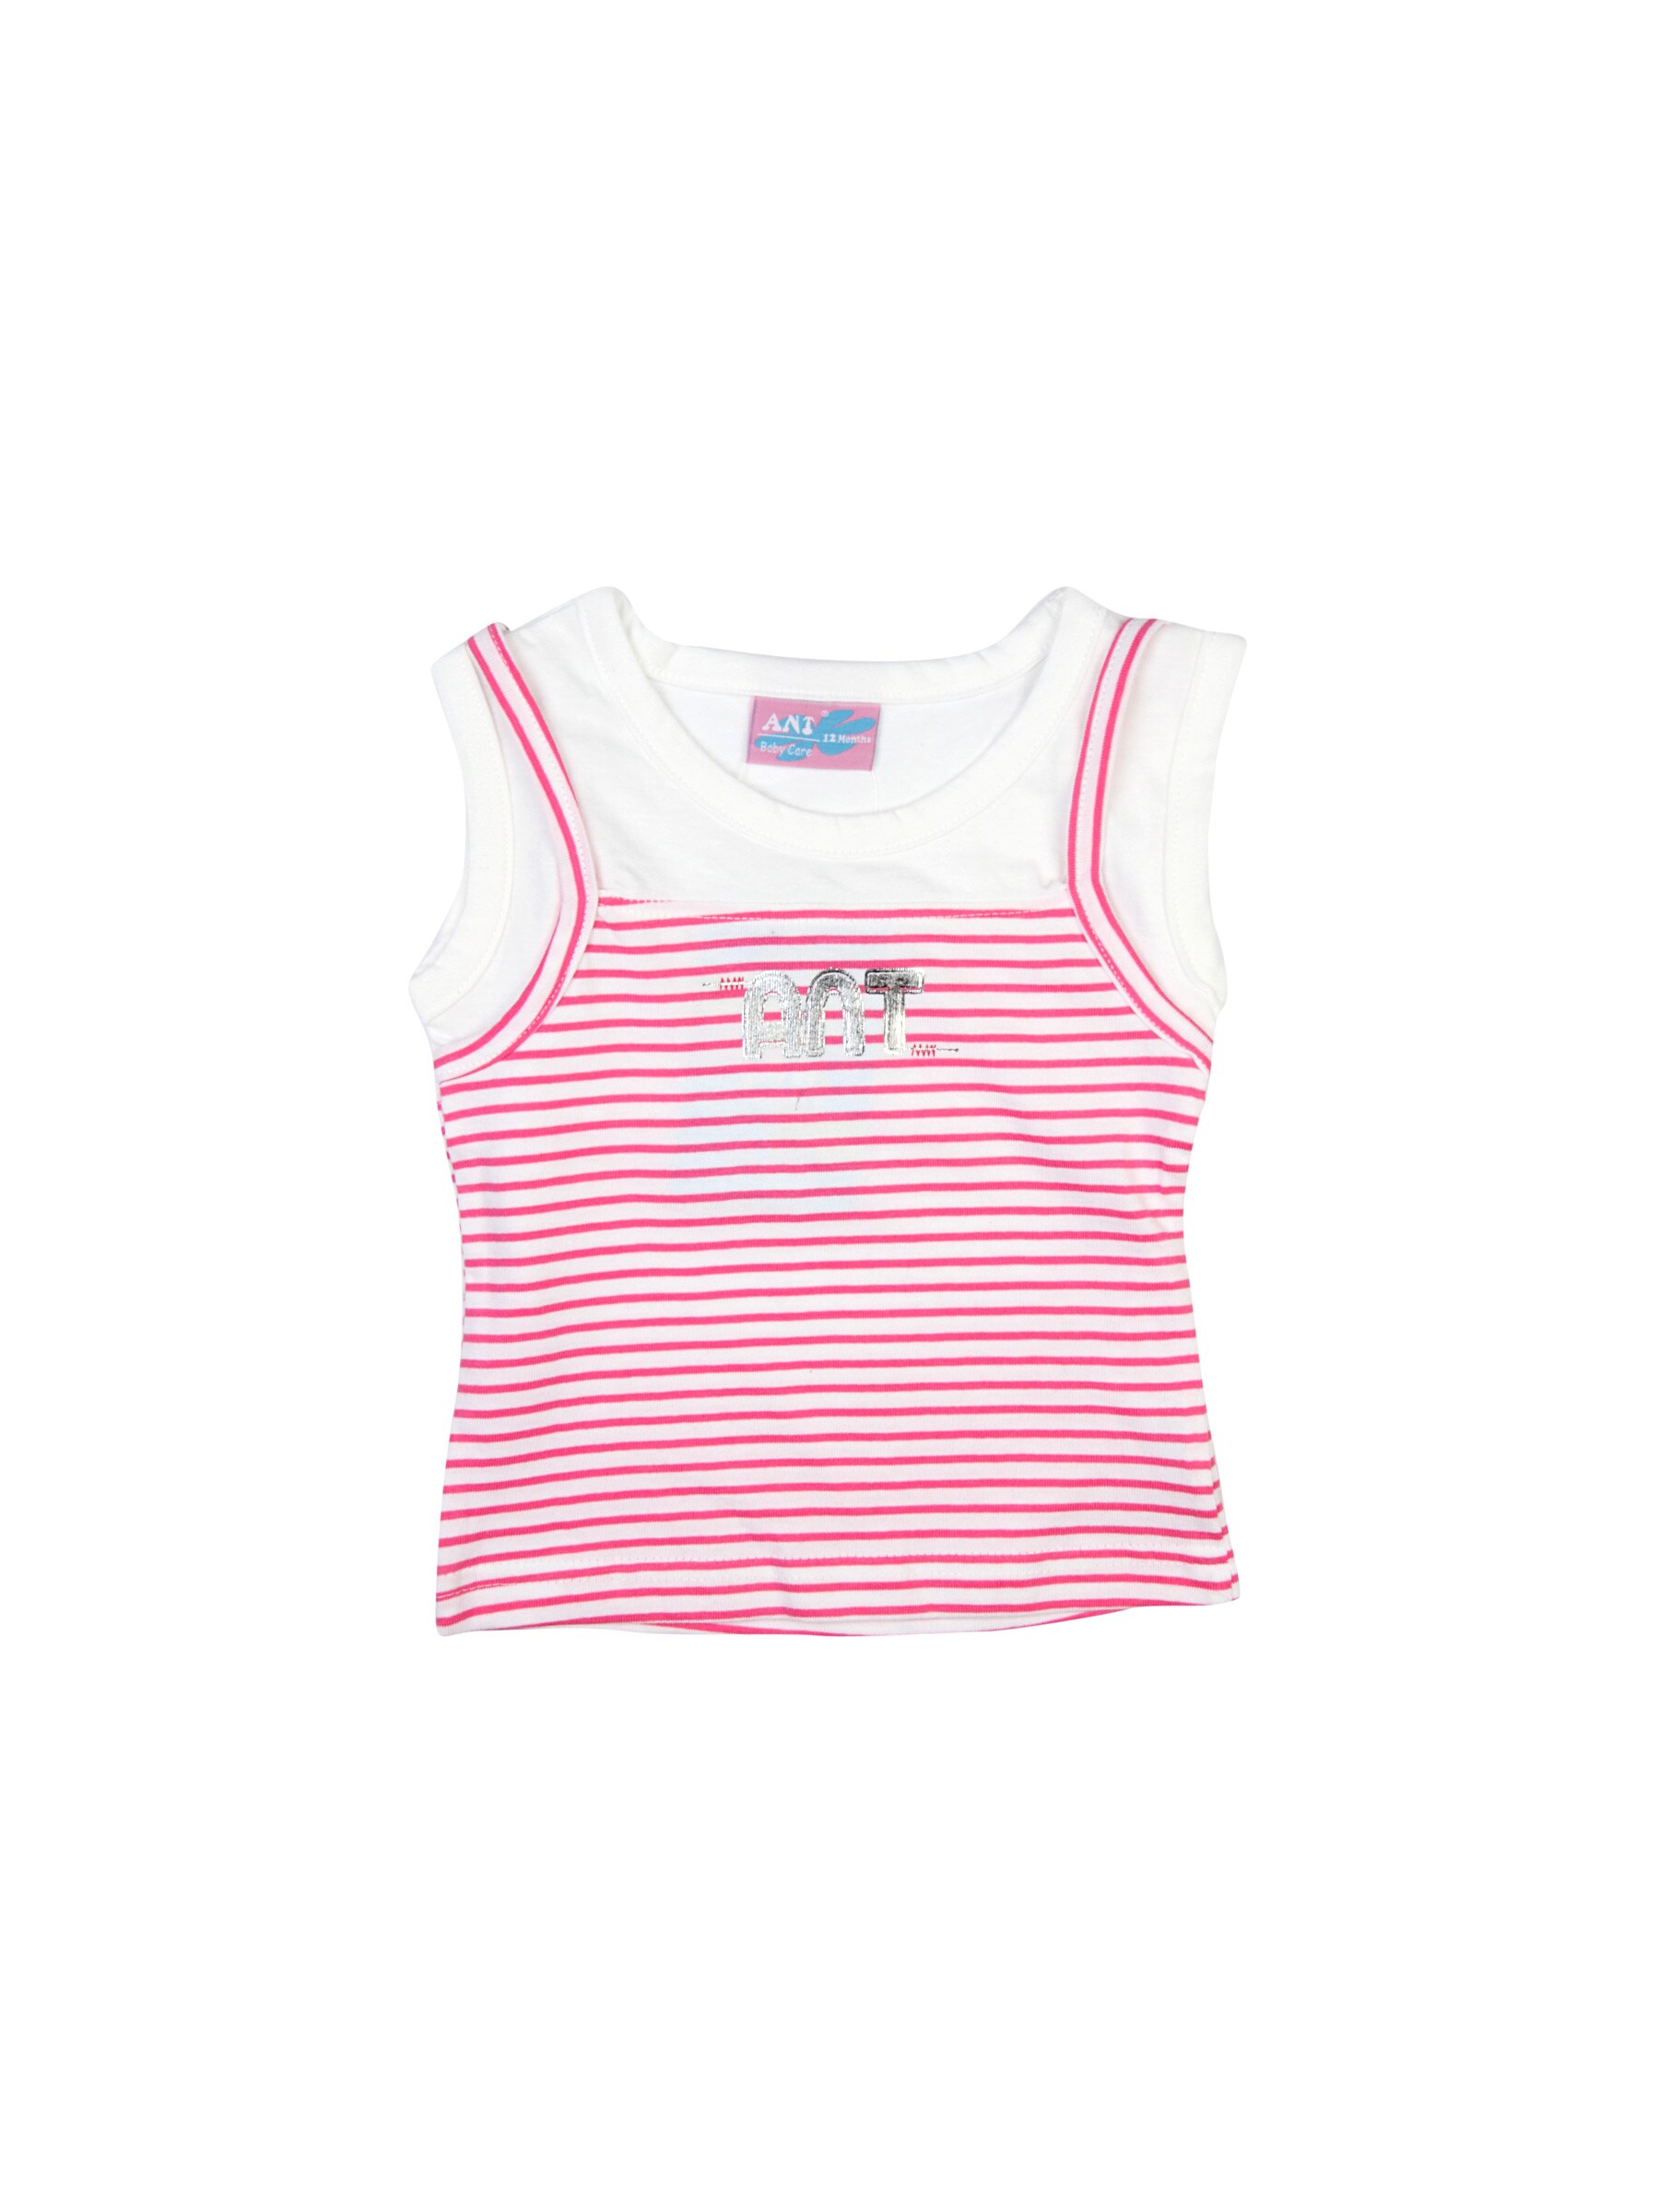 Ant Kids Pink Tops